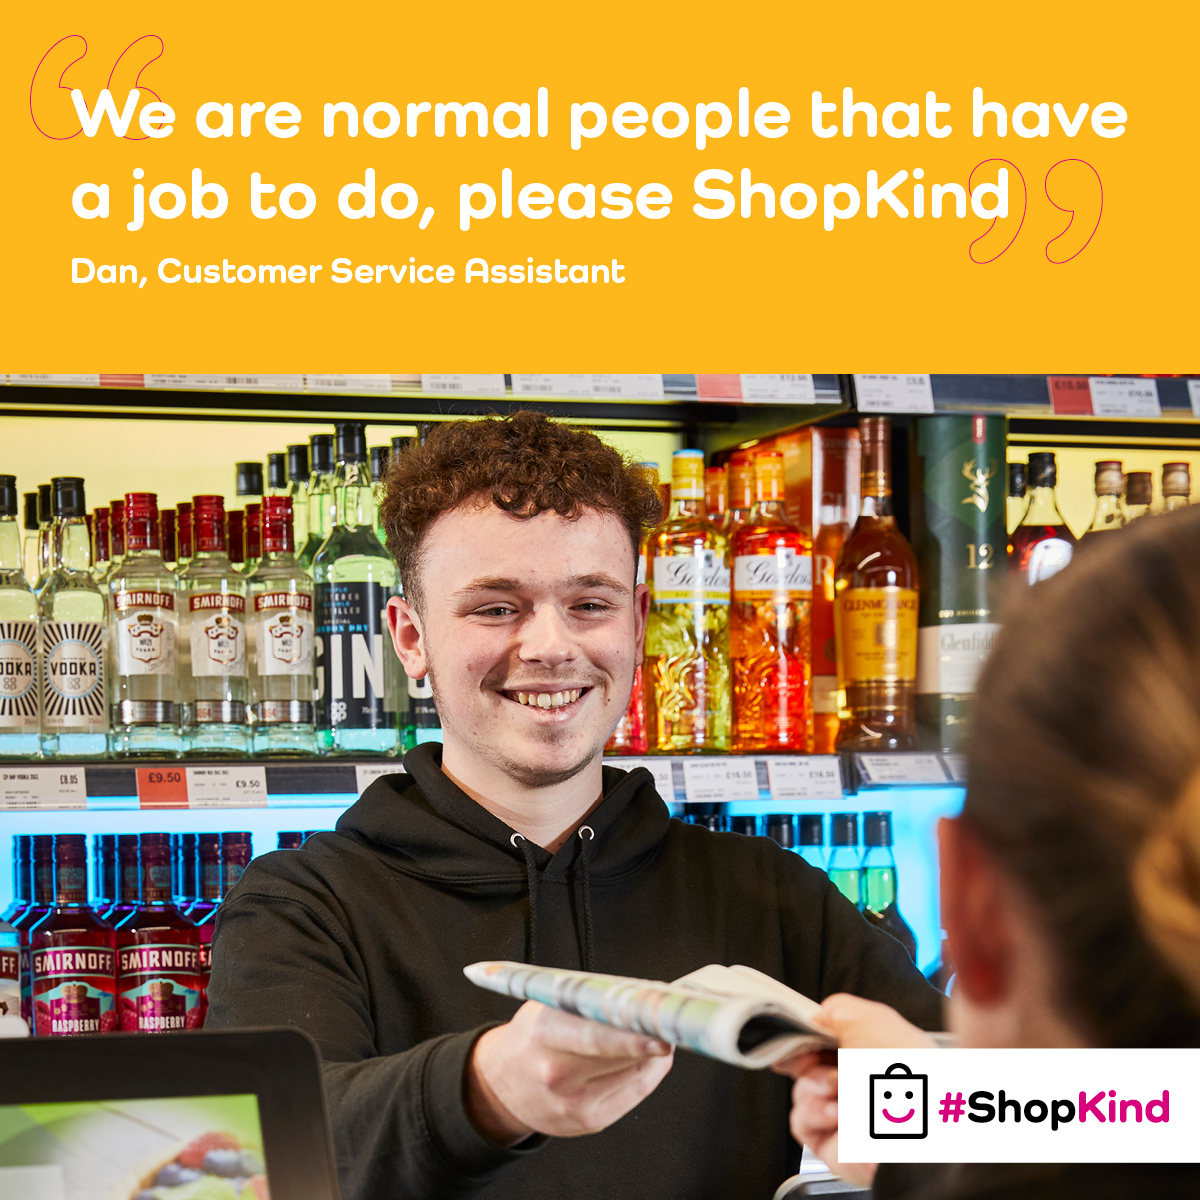 Shopworkers play a vital role in our communities, but USDAW, the shopworkers' Union, estimates that 70% of shopworkers in the UK have faced verbal abuse. Remember that the person behind the counter is doing their best and deserves respect. #ShopKind